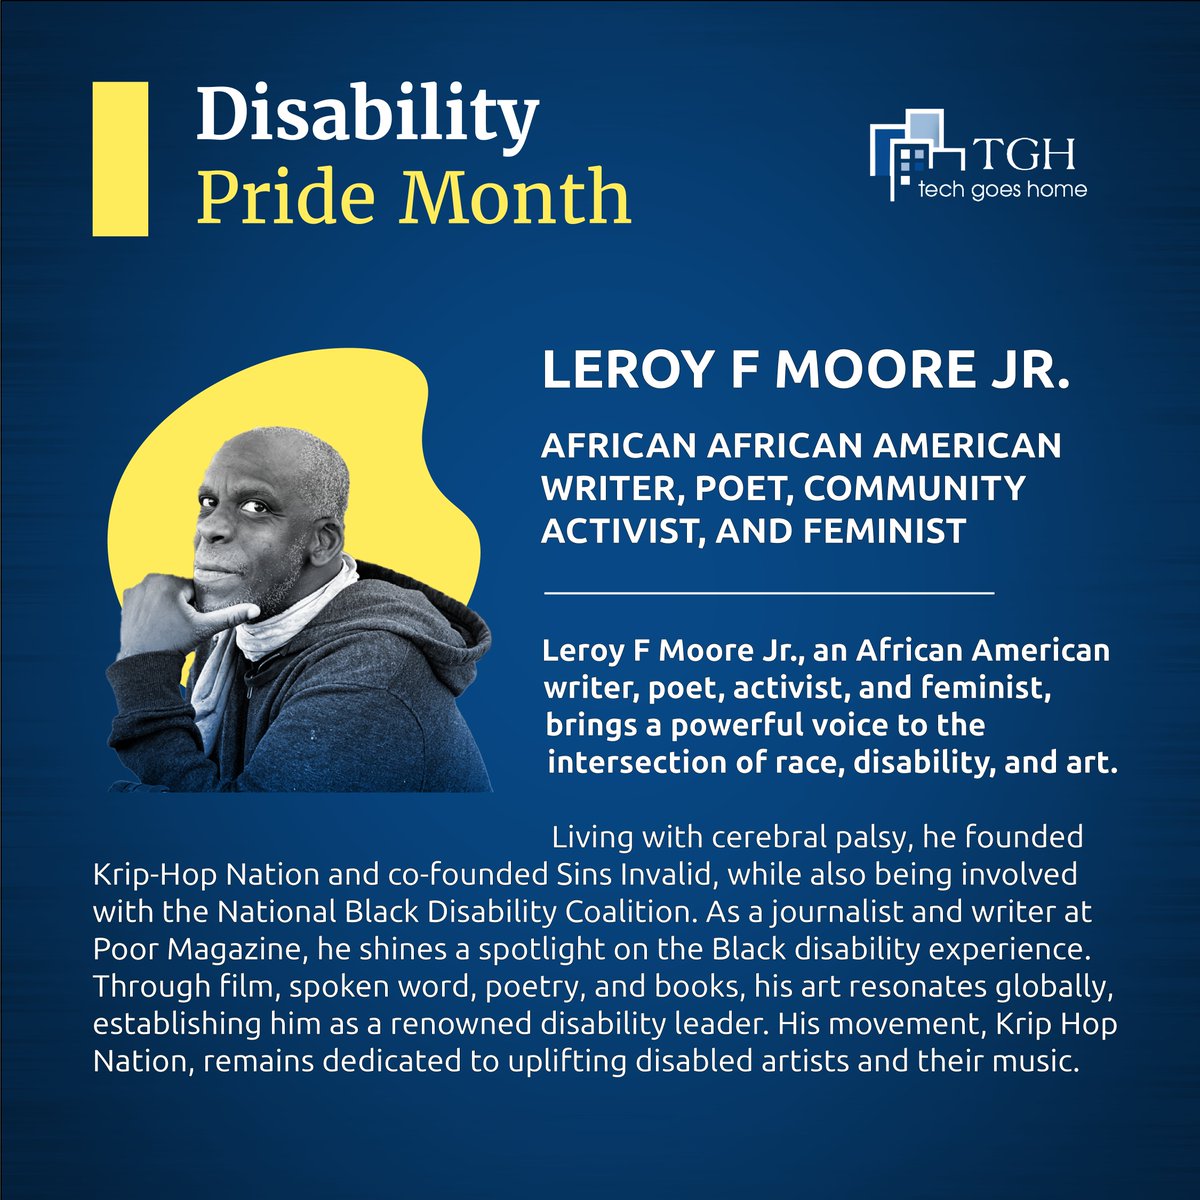 Today we honor Leroy F Moore. Founder of @kriphopnation, Moore is an African American #writer, #poet, #activist, and #feminist. Moore brings a powerful voice to the intersection of #race, #disability, and #art. So grateful to this #InspirationalLeader 🙌 #DisabilityPrideMonth